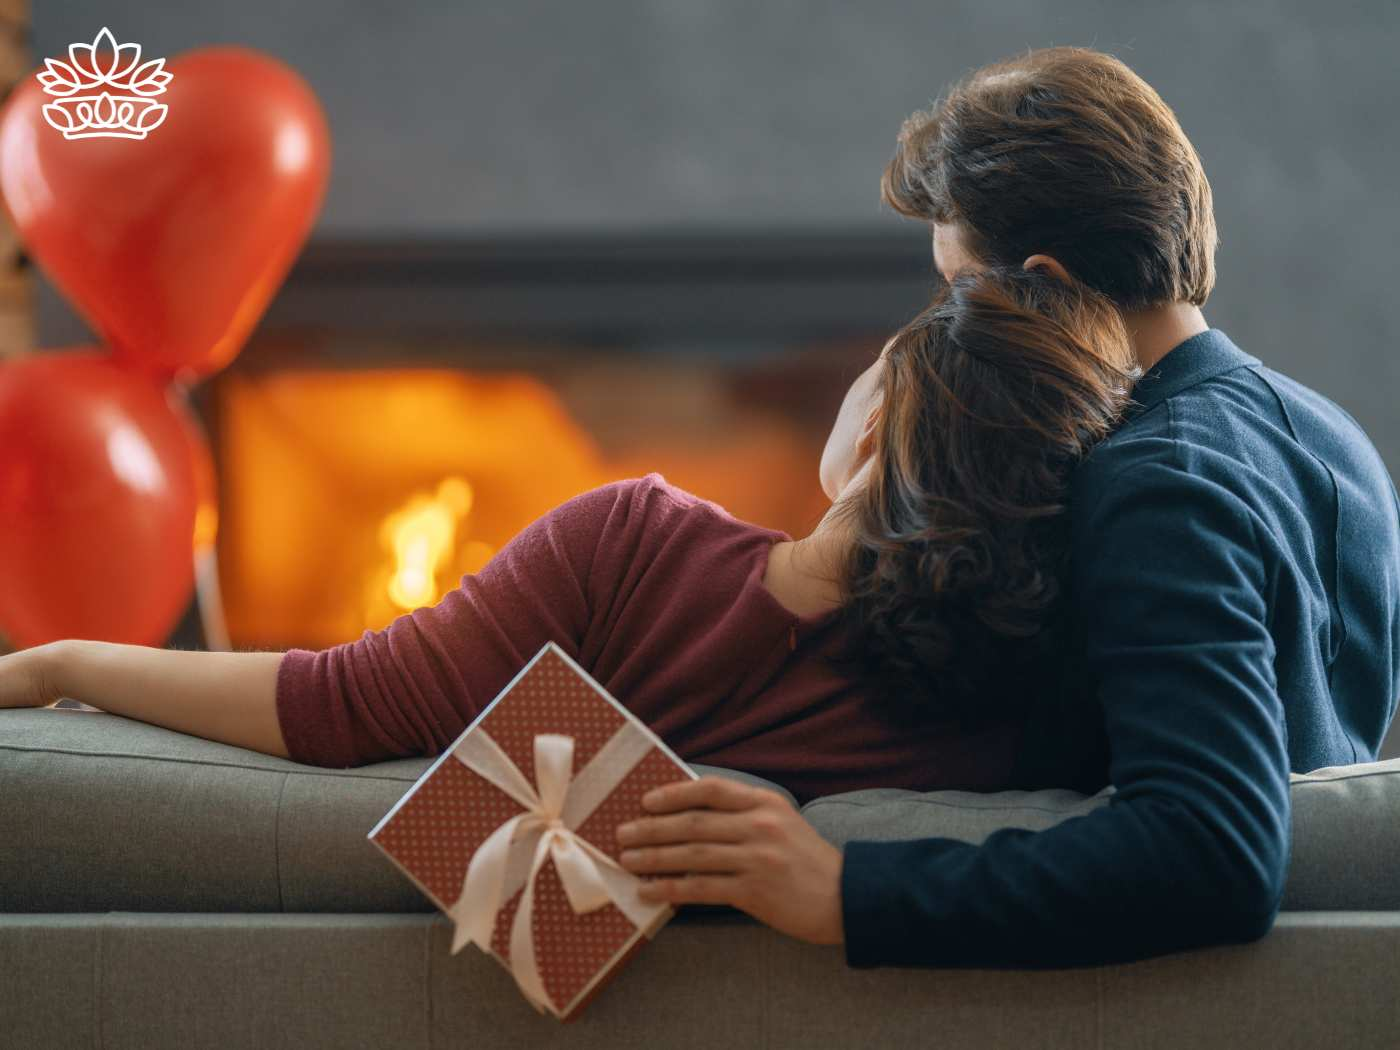 Couple embracing in a cosy living room with a romantic fireplace and Valentine's Day balloons in the background, holding a gift that symbolises love and care. Fabulous Flowers and Gifts. Delivered with Heart.